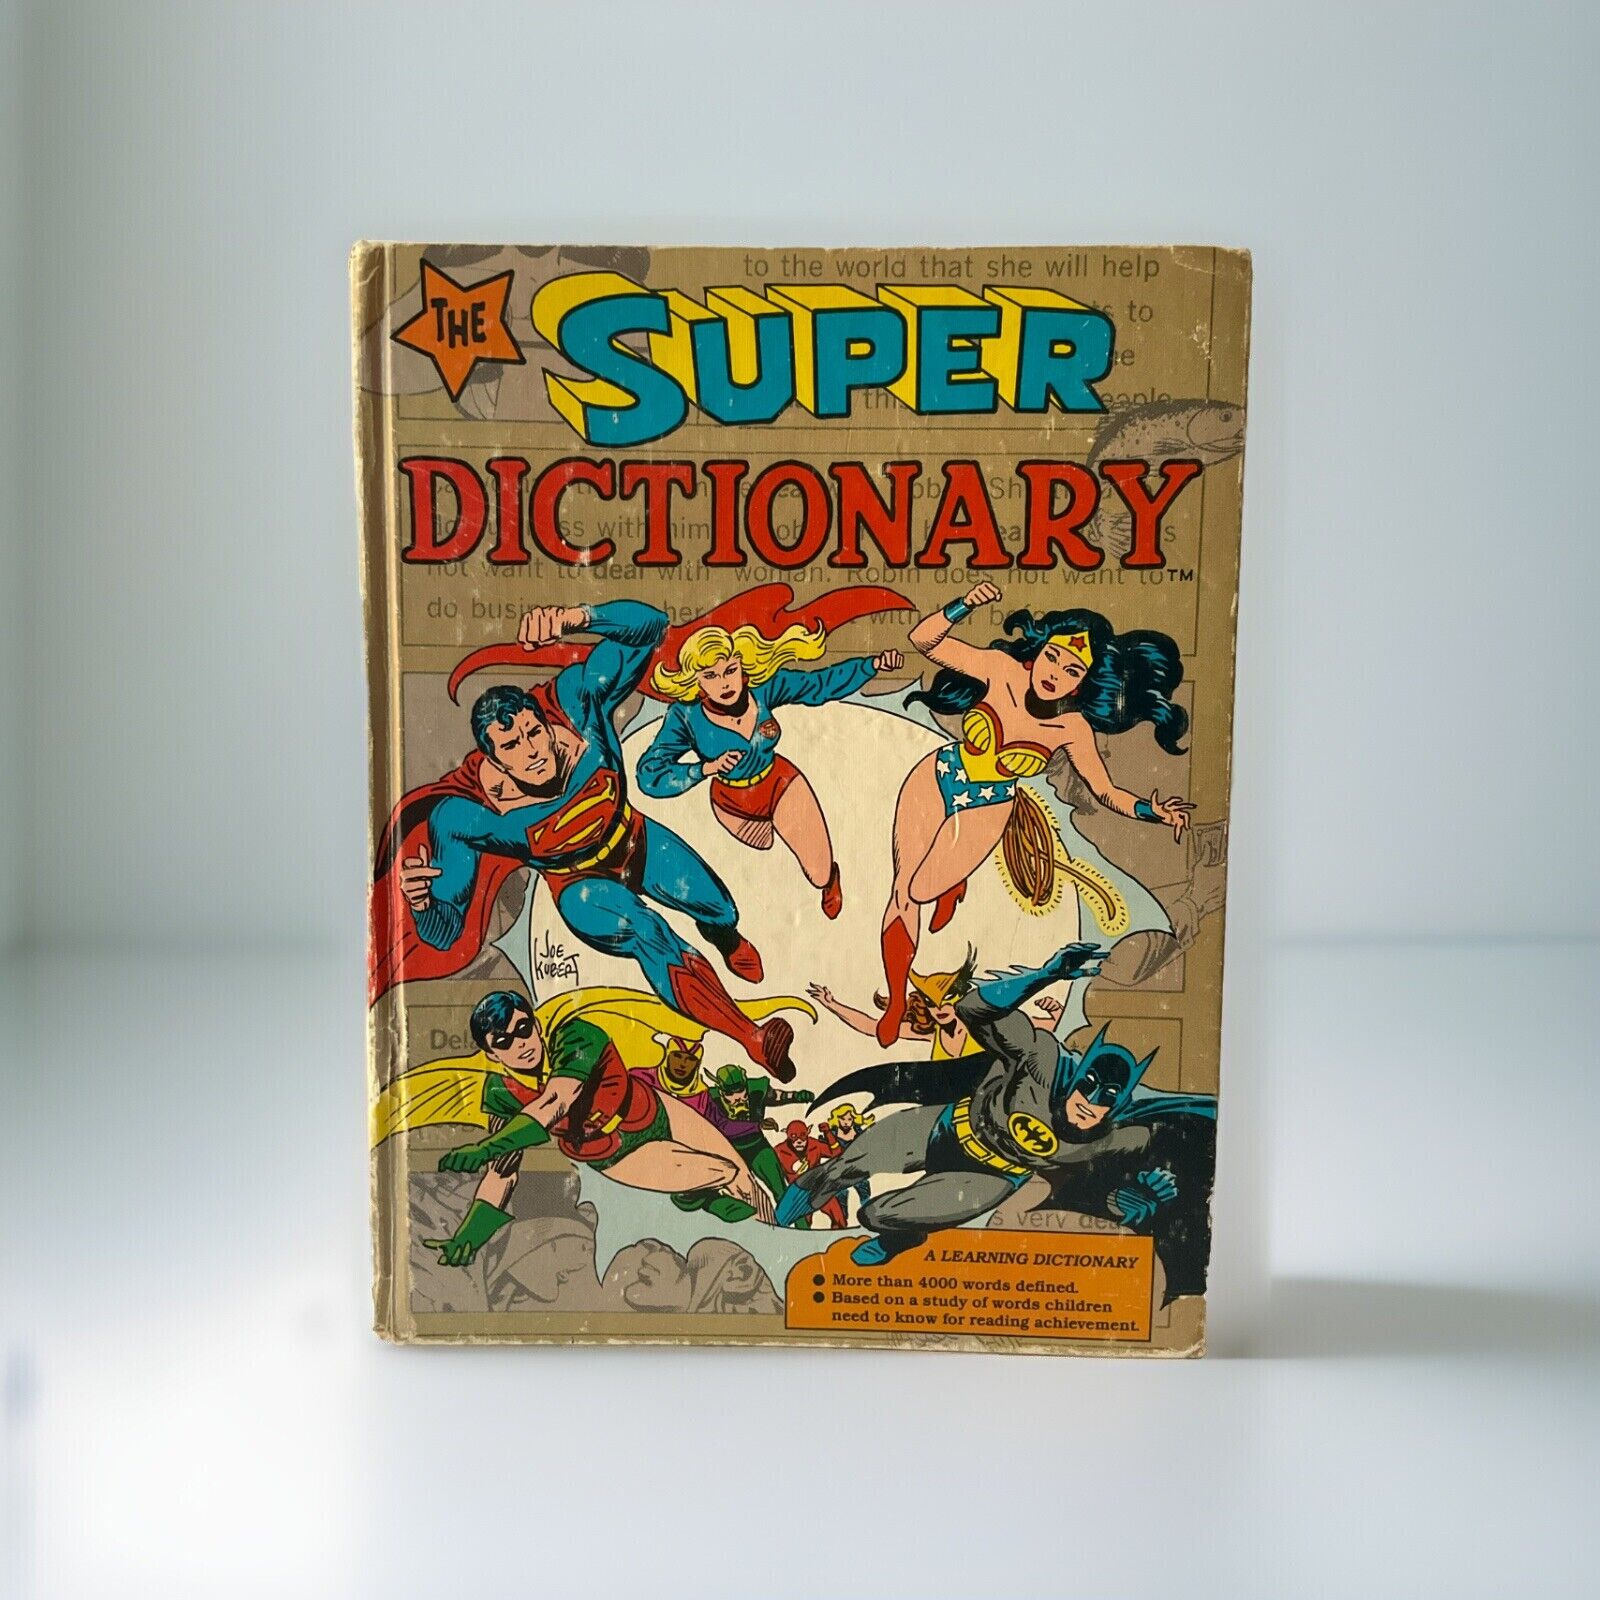 1978 The Super Dictionary By Mary Holmes With DC Comics Characters 